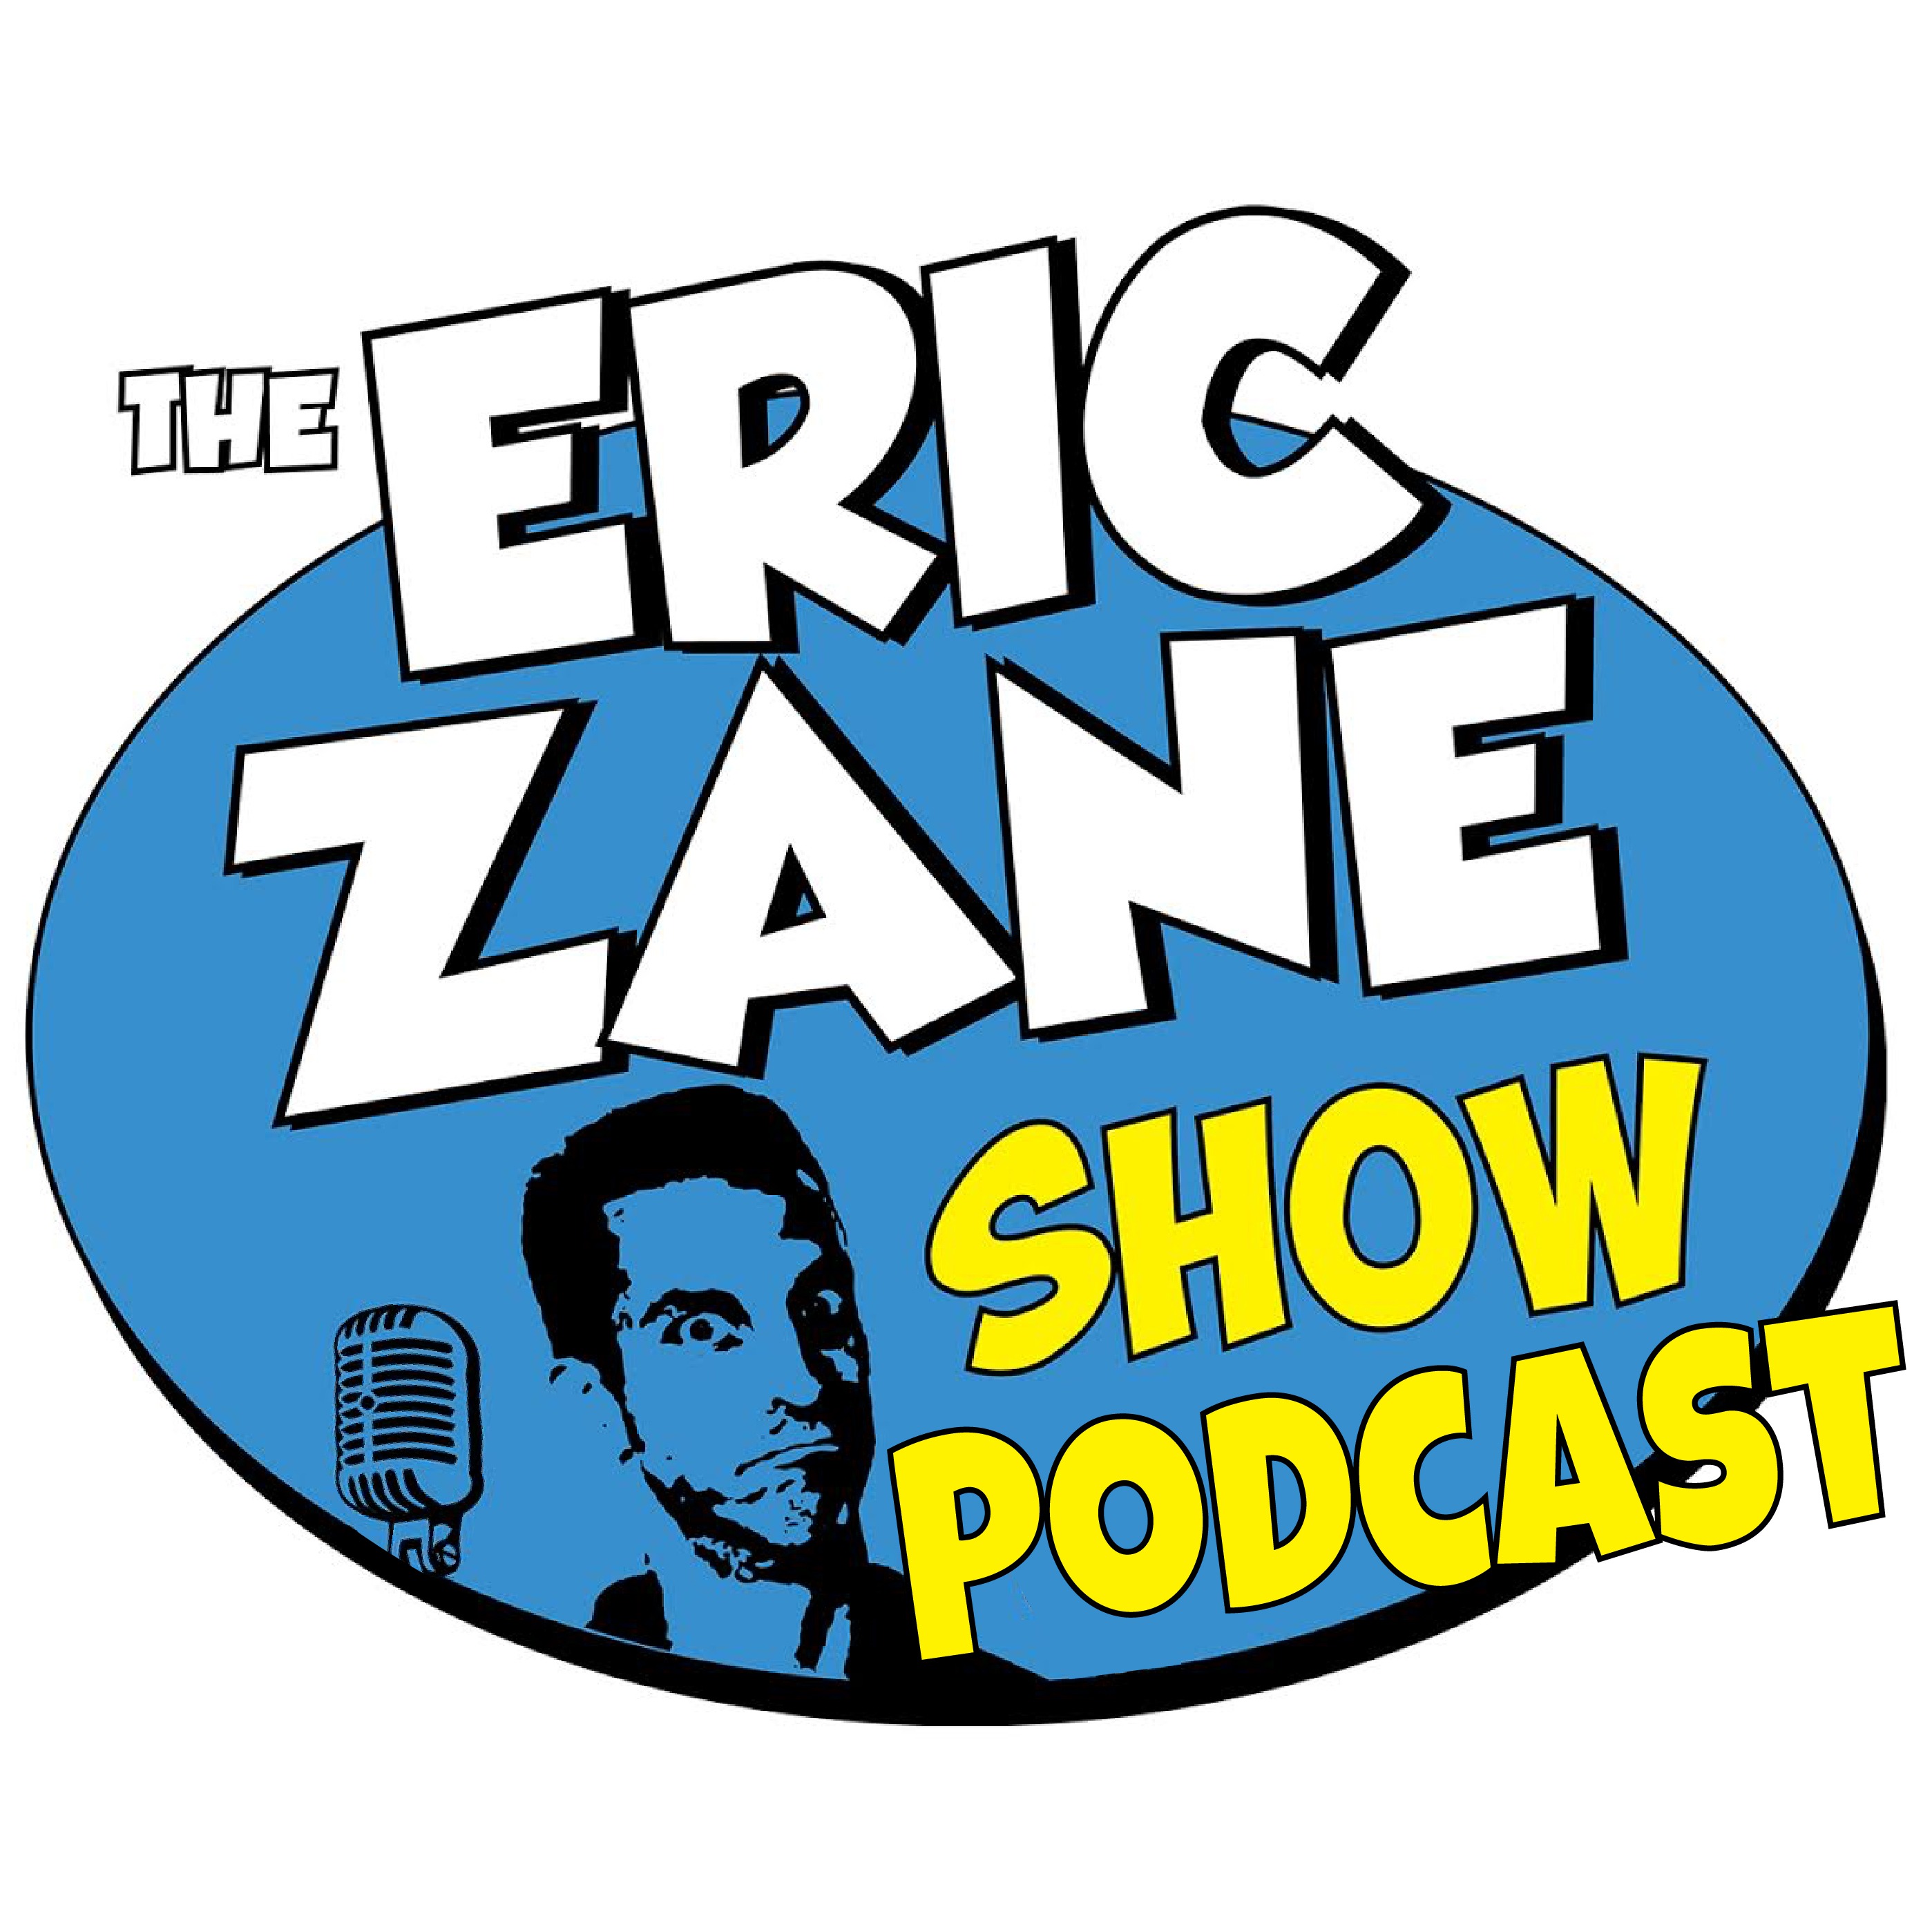 Eric Zane Show Podcast 947 - You've never heard a Trump impression this perfect